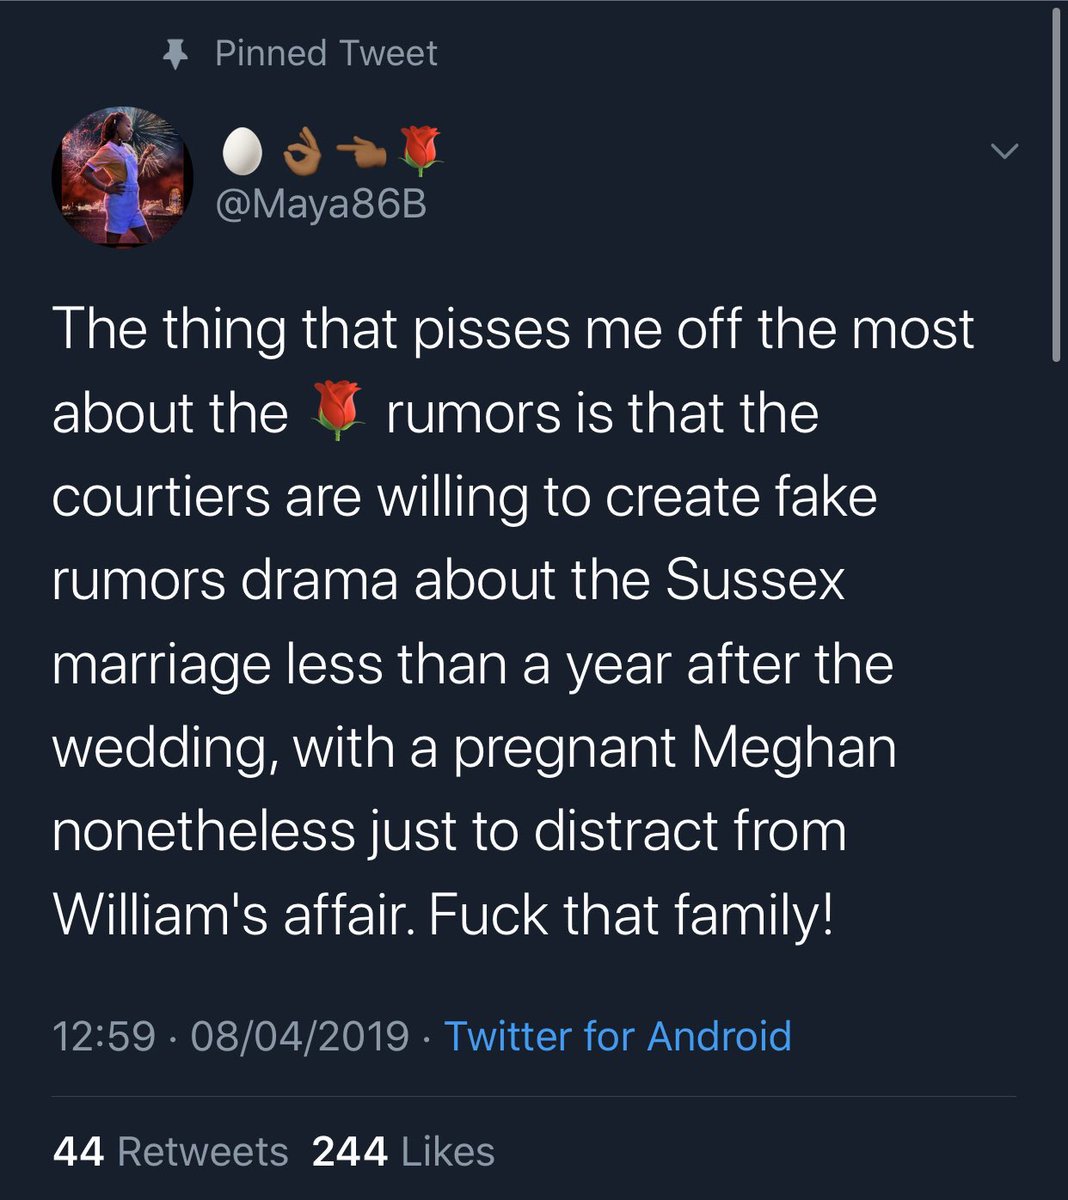 11. The R*se rumours, the person who made these rumours is called Nicole Cliffe, shortly after creating this lie she deactivated her account, however at the end of her blog it clearly states it’s gossip